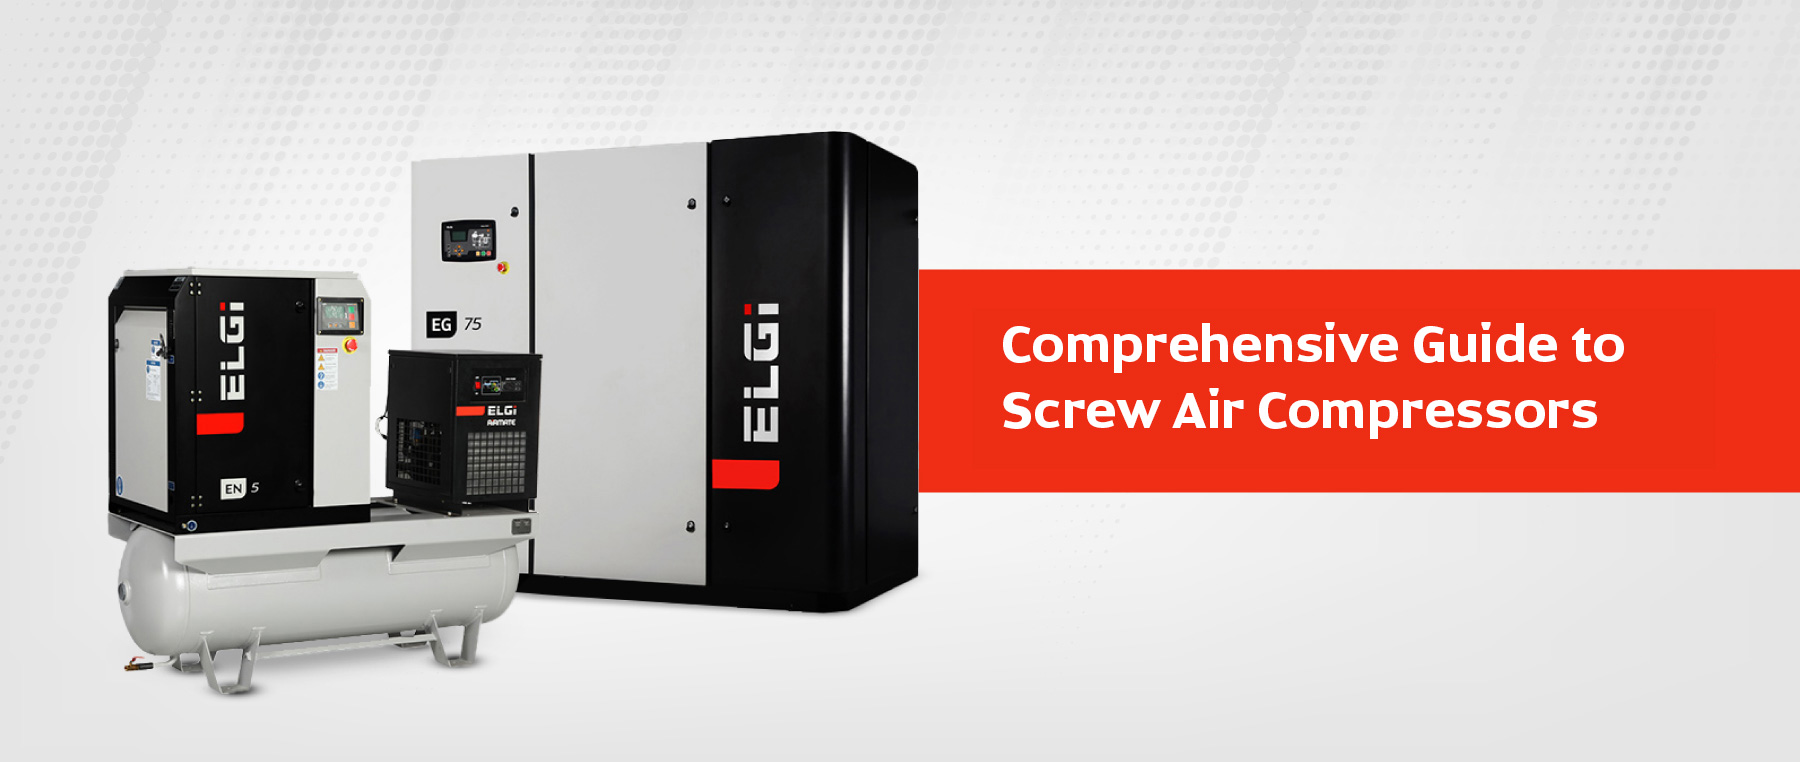 Comprehensive Guide to Screw Air Compressors